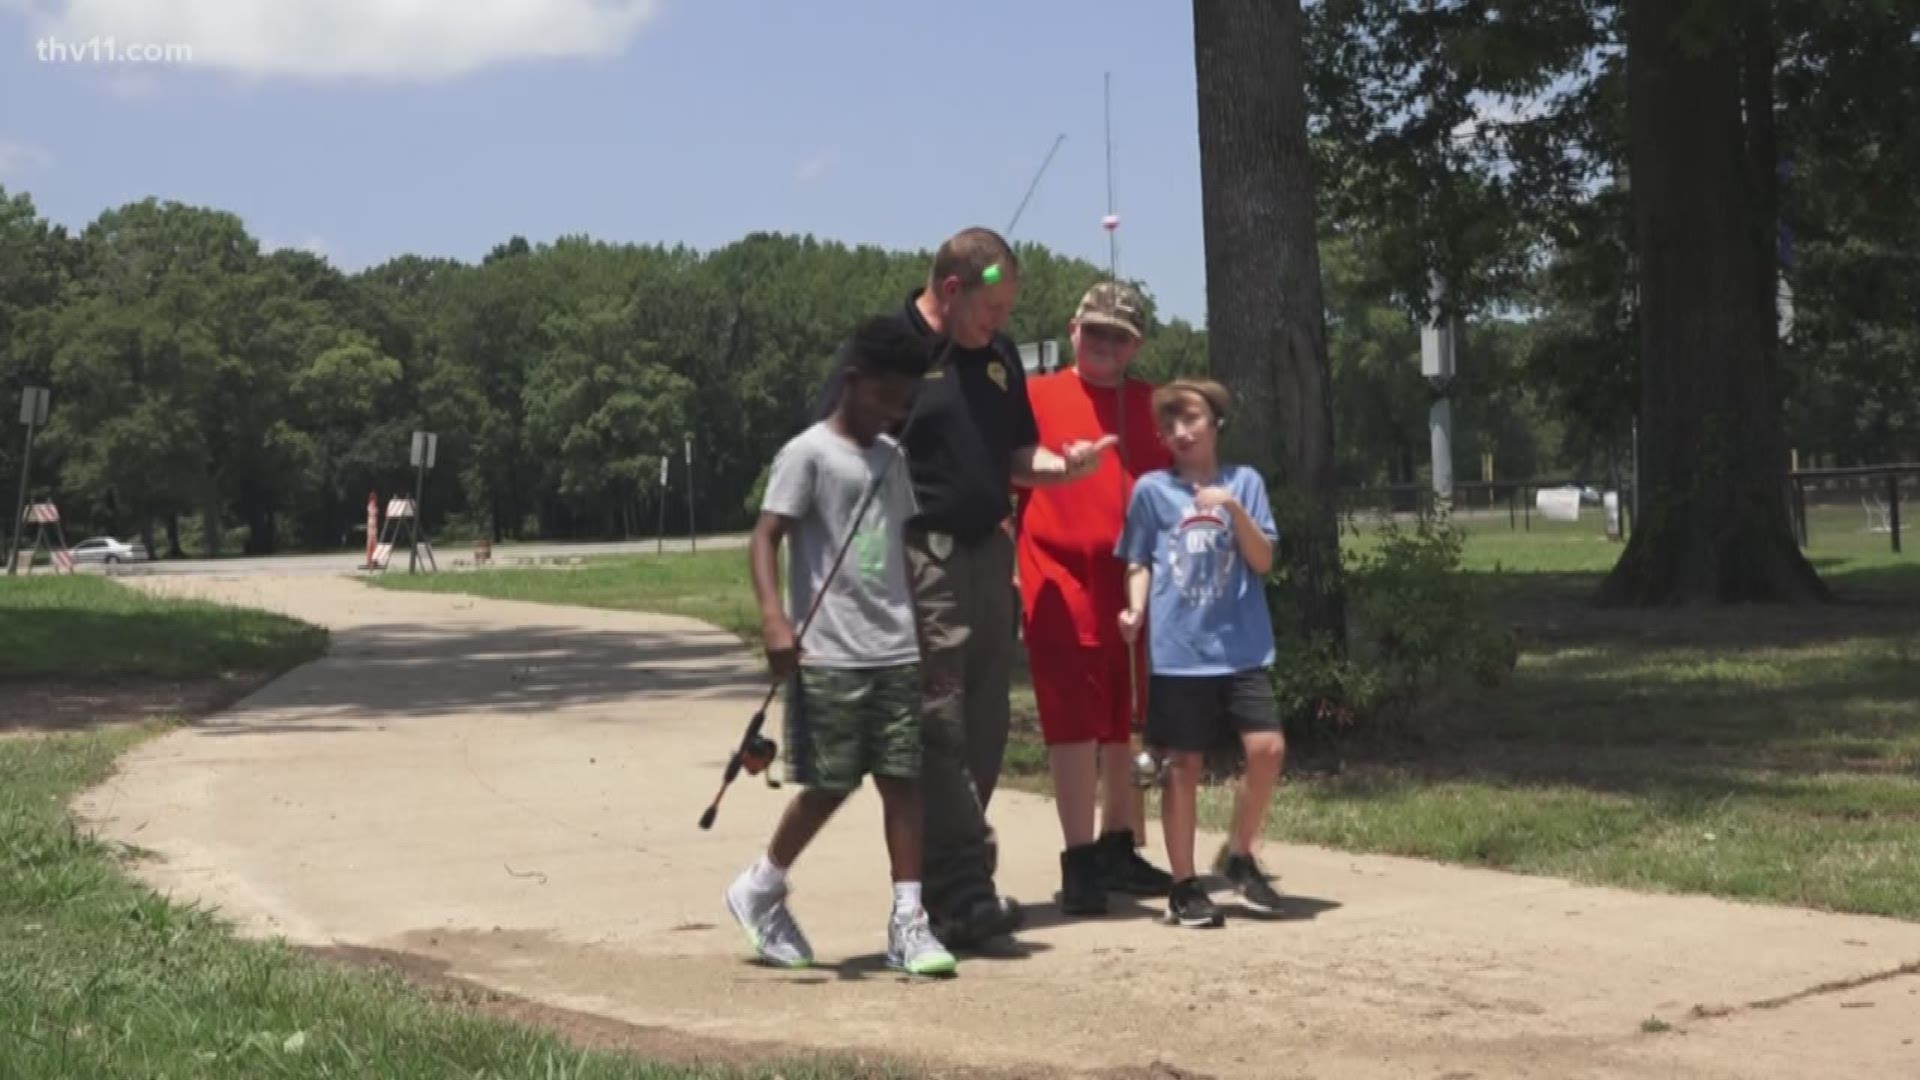 Maybe it just takes a rod, reel, and one-on-one time to create a lasting bond. That's what Bryant police have done to bridge a gap in their community.